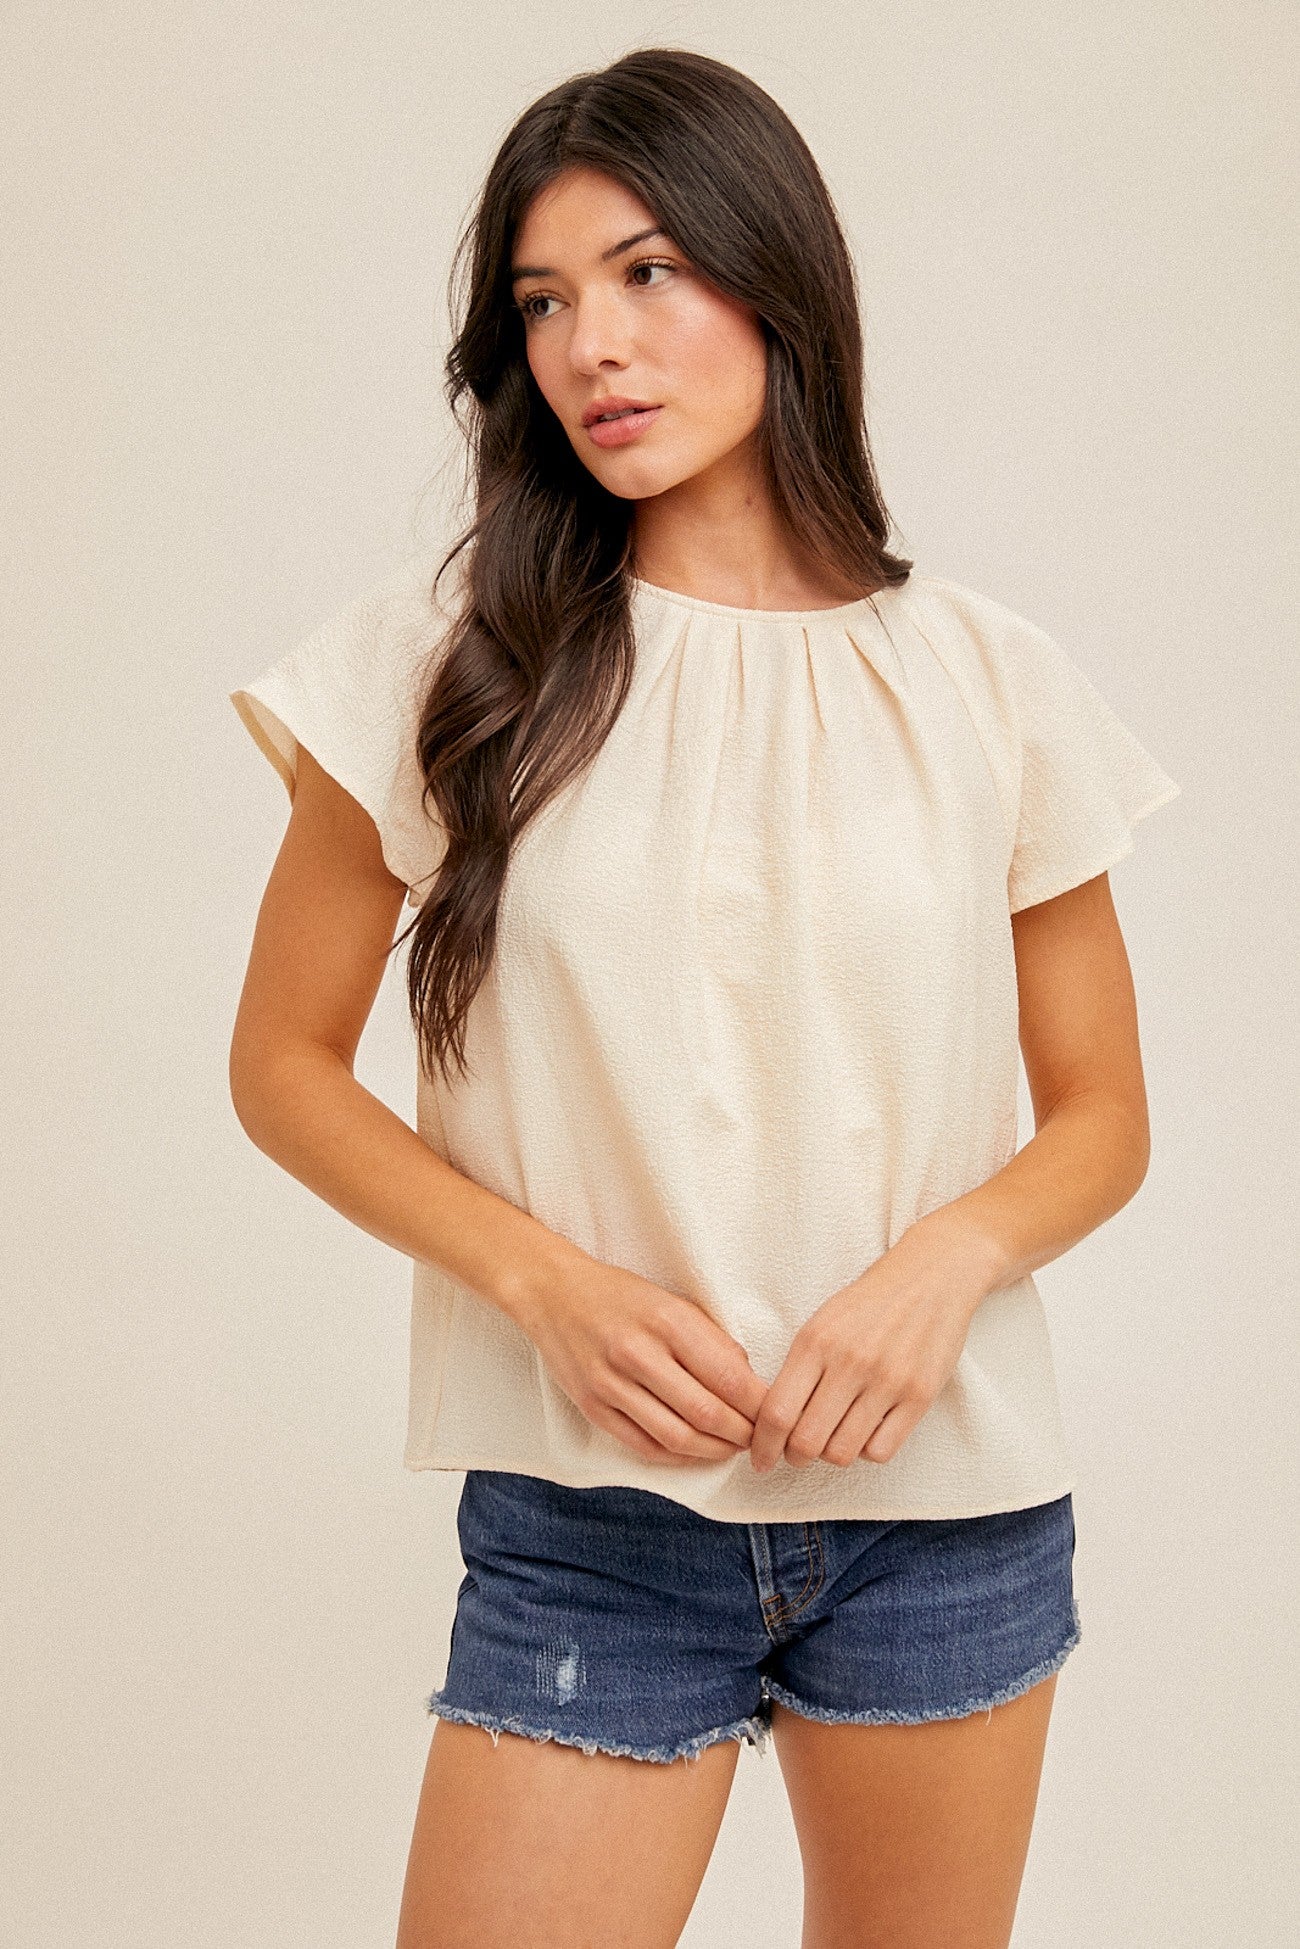 Flutter Sleeve Cream Colored Top